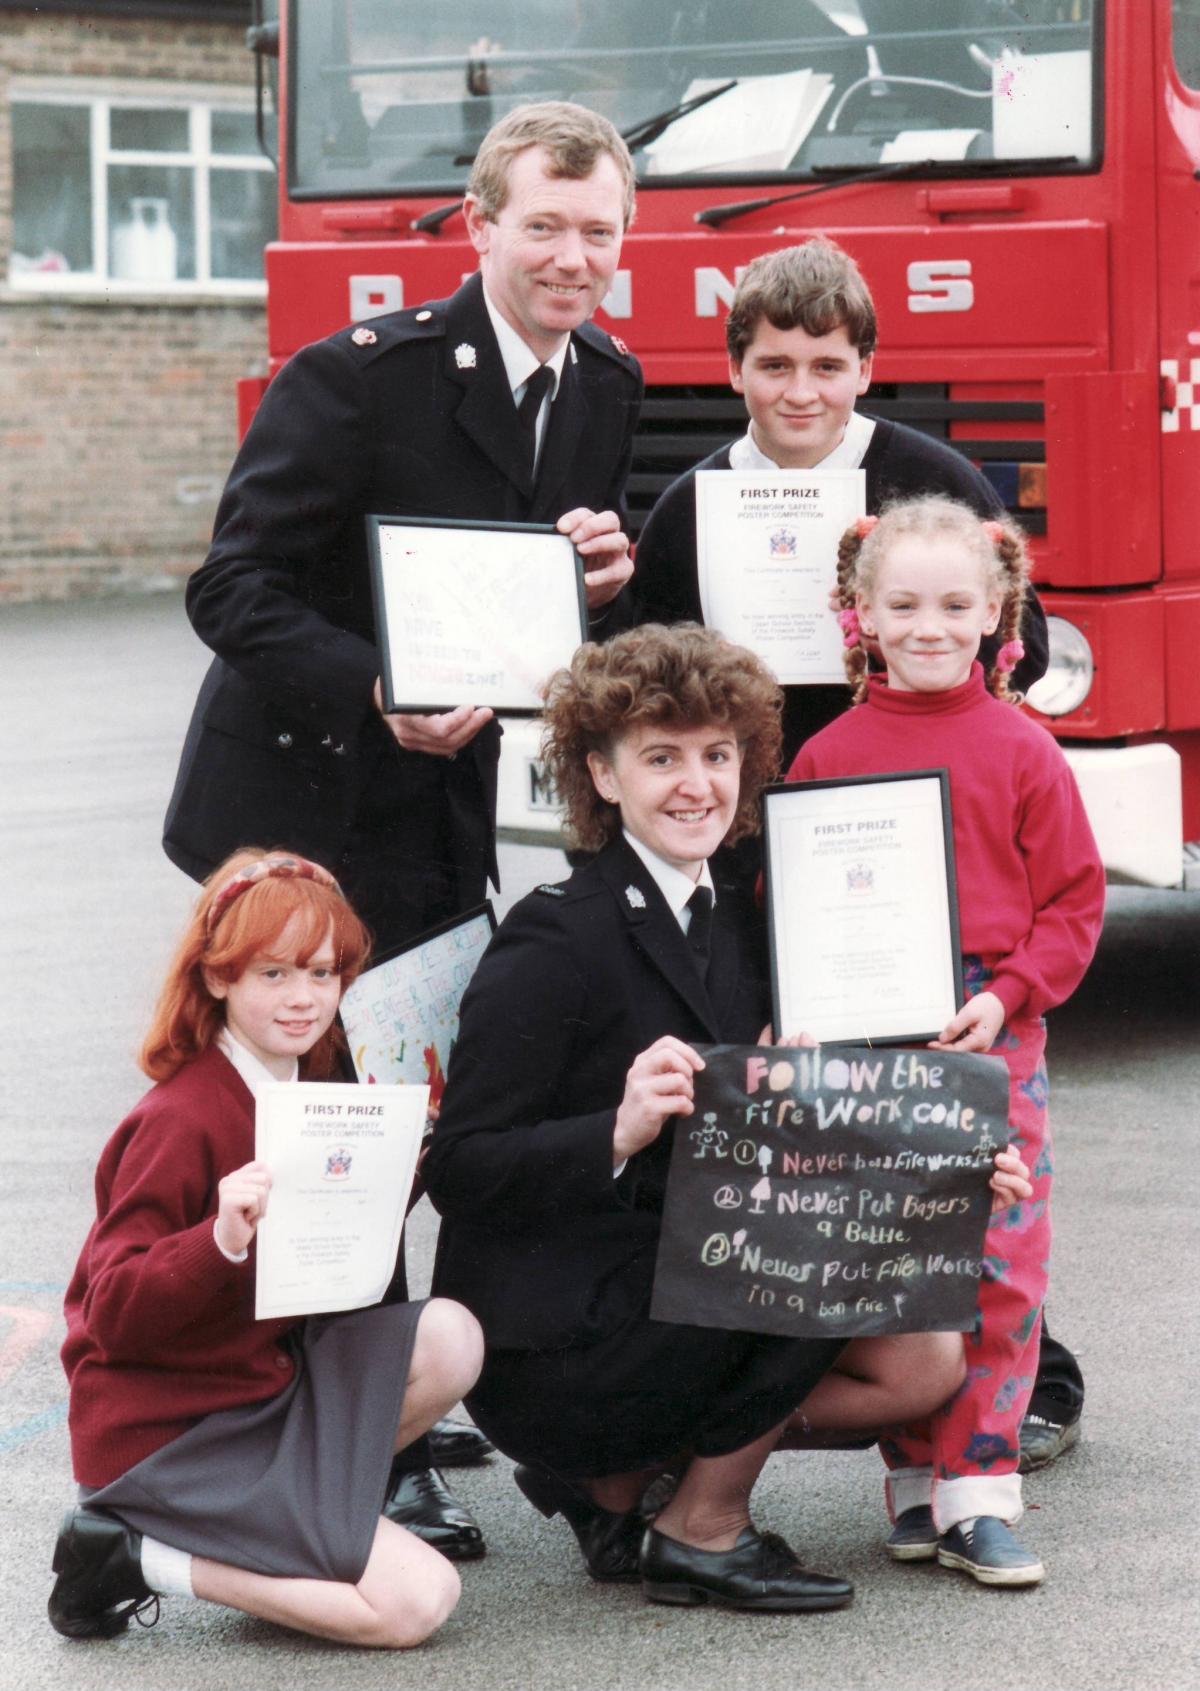 Pupils take part in a firework safety campaign in 1992